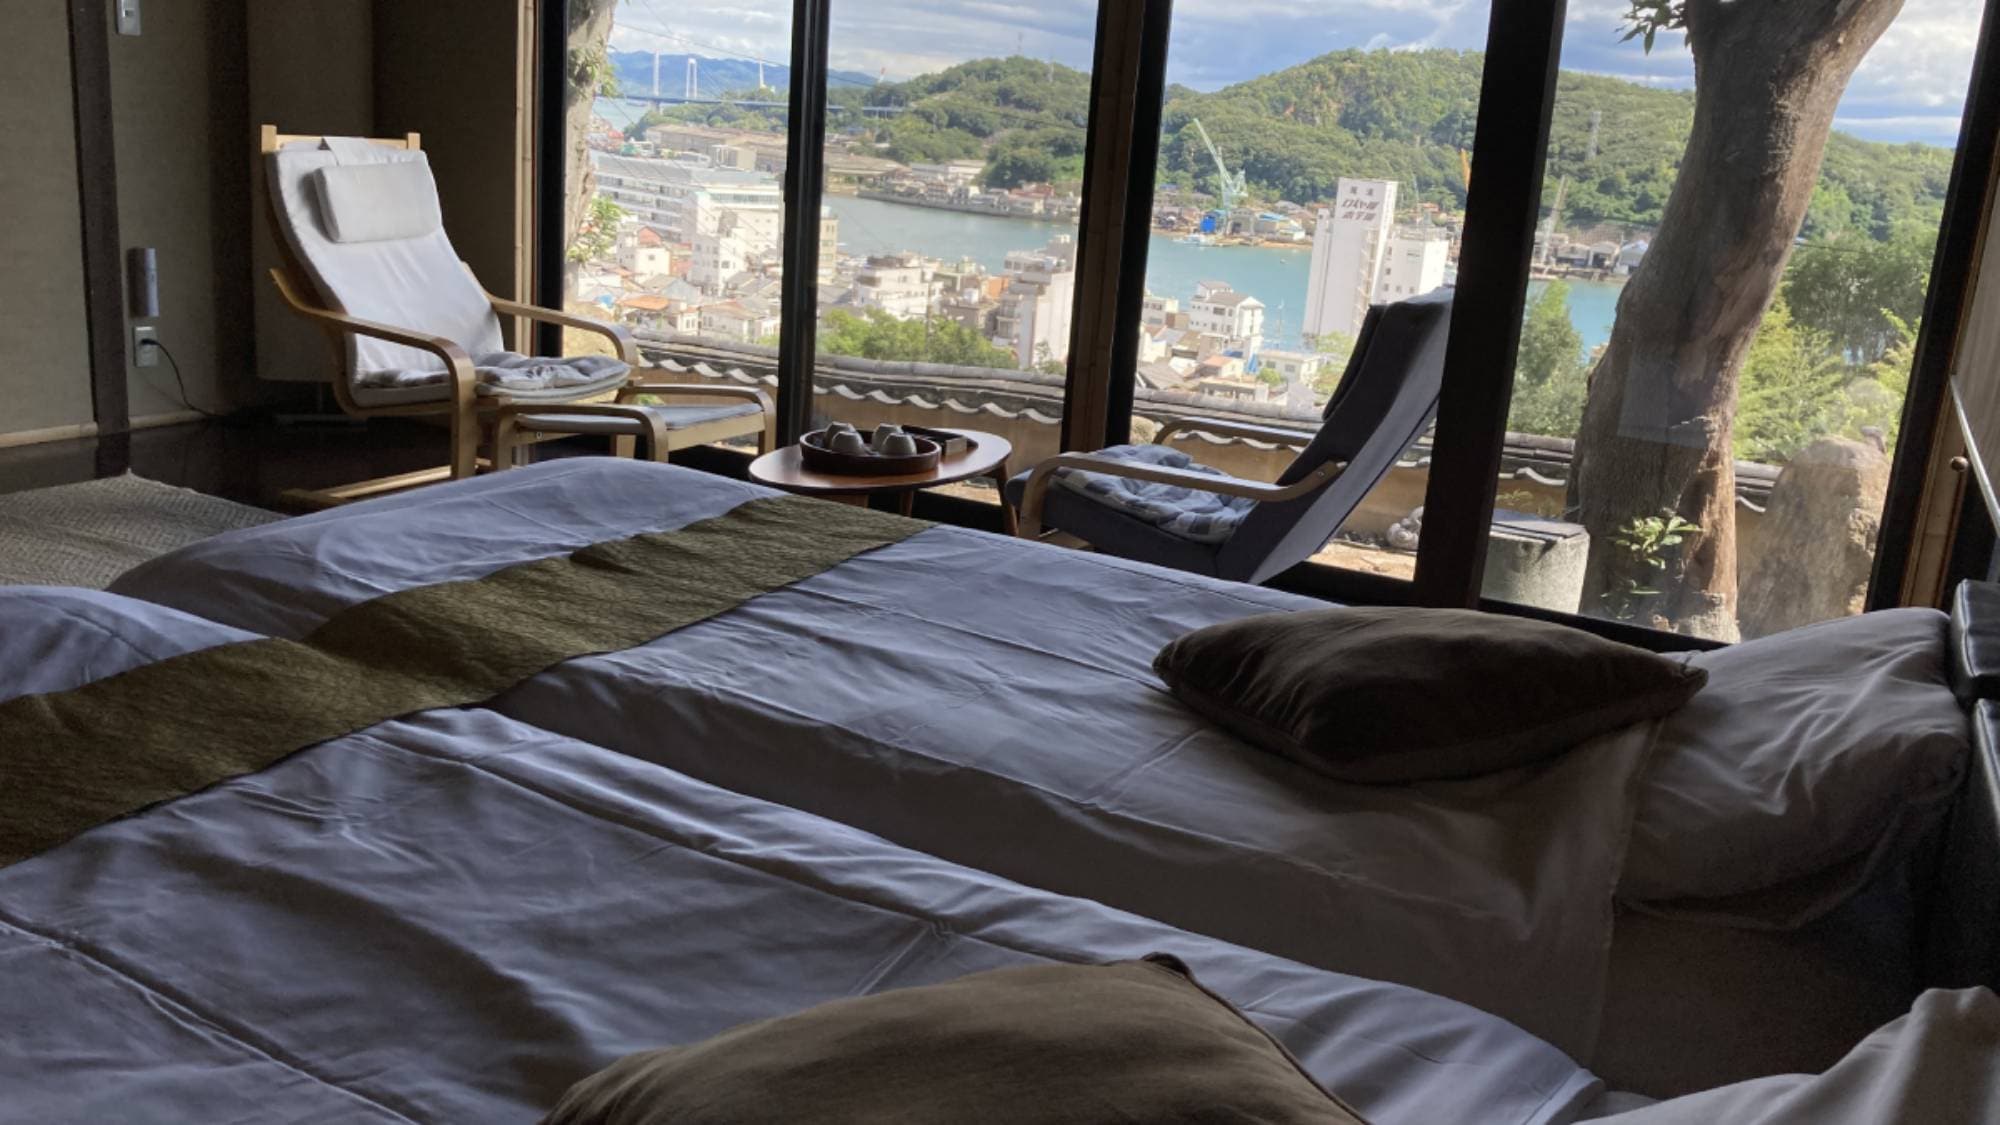 ・ Location overlooking Onomichi from the room